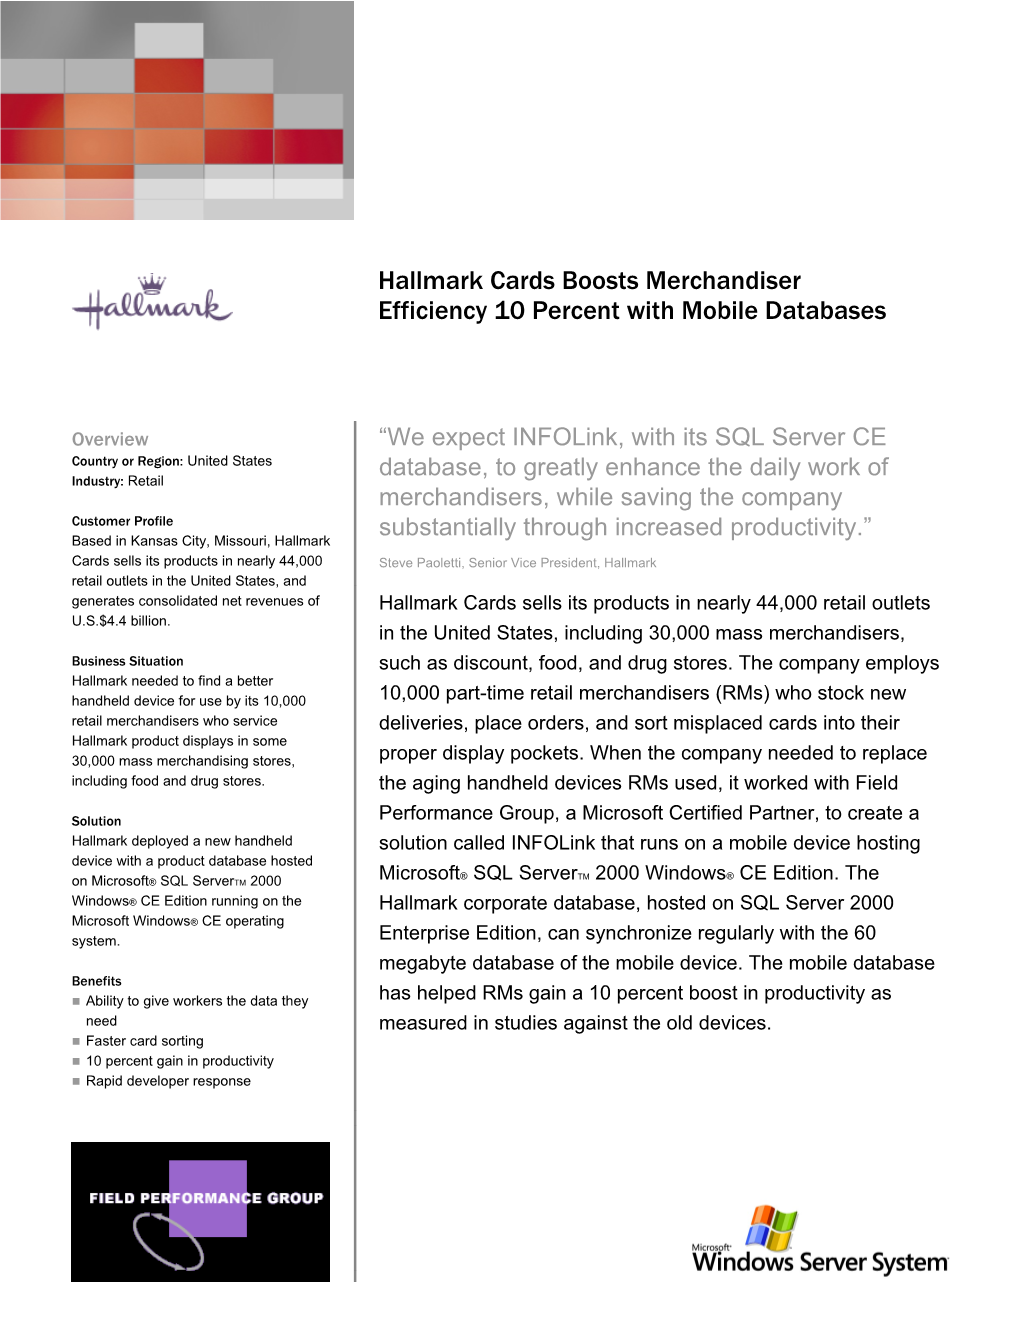 Hallmark Cards Boosts Merchandiser Efficiency by 10 Percent with Mobile Databases